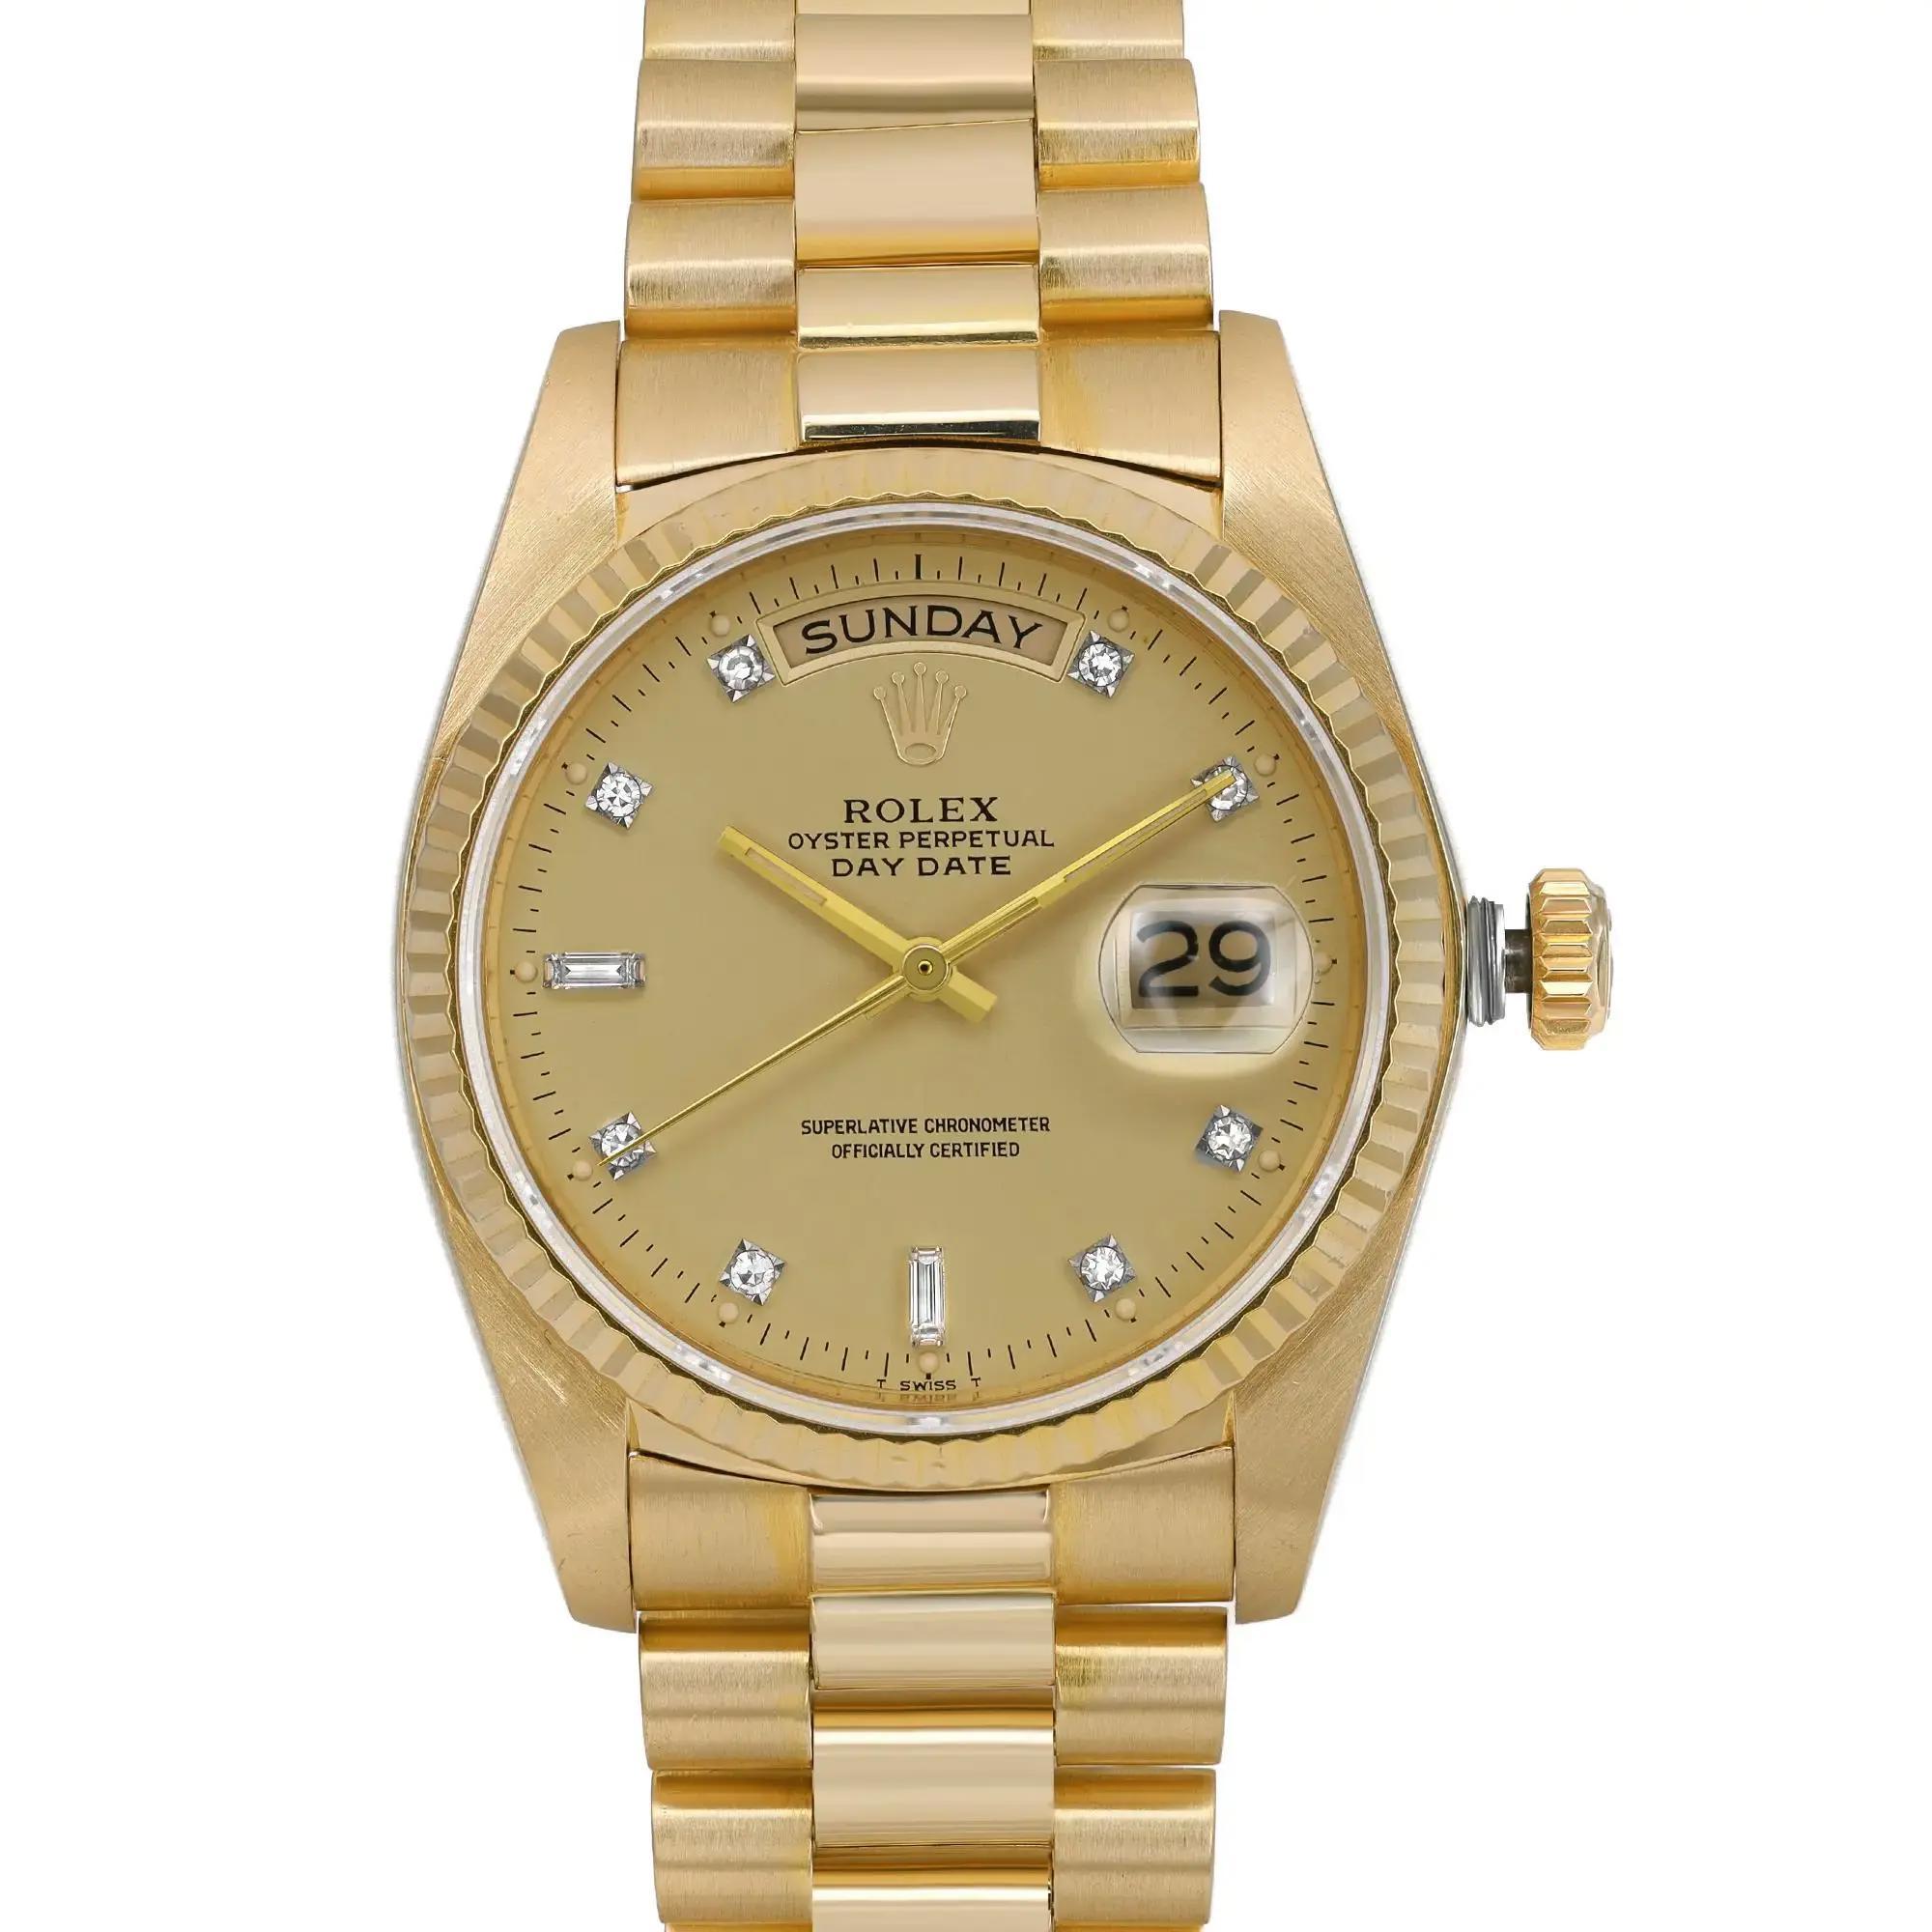 Rolex Day-Date 36mm 18k Yellow Gold Champagne Diamond Dial Automatic Watch 18038 In Excellent Condition For Sale In New York, NY